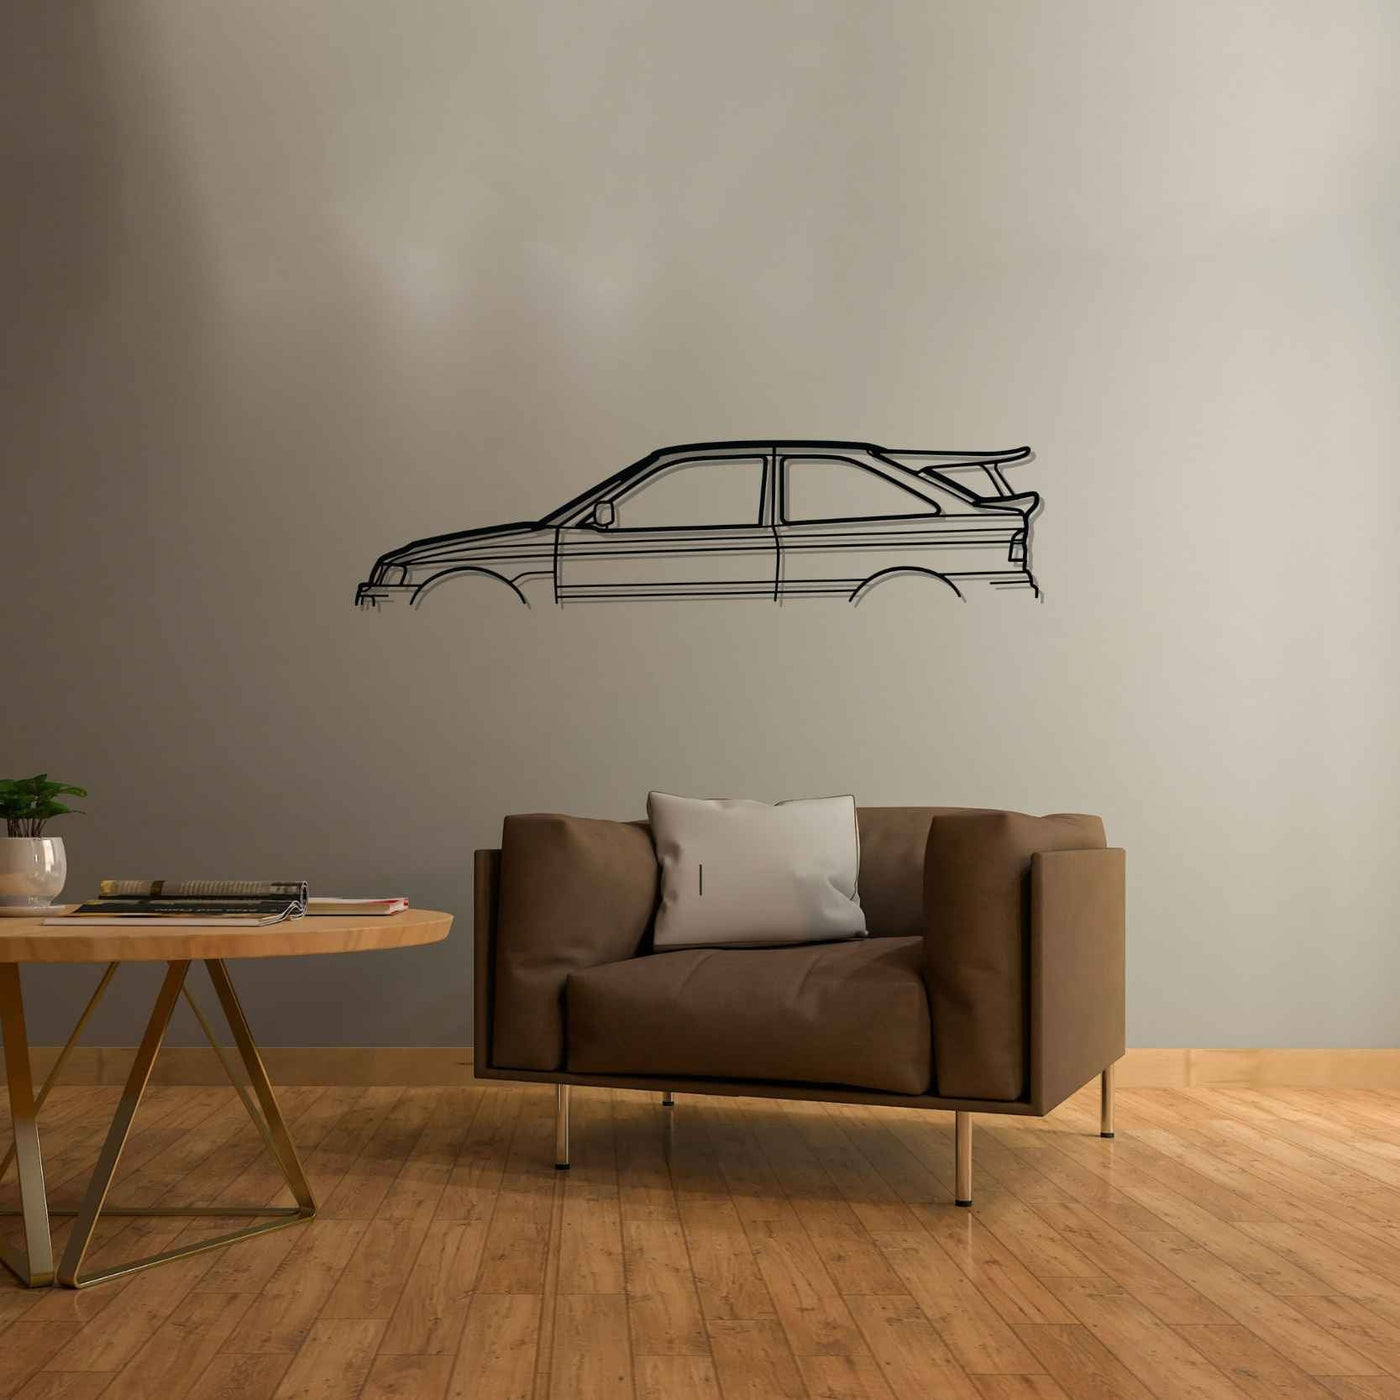 Escort Cosworth RS 1992 Classic Silhouette Metal Wall Art